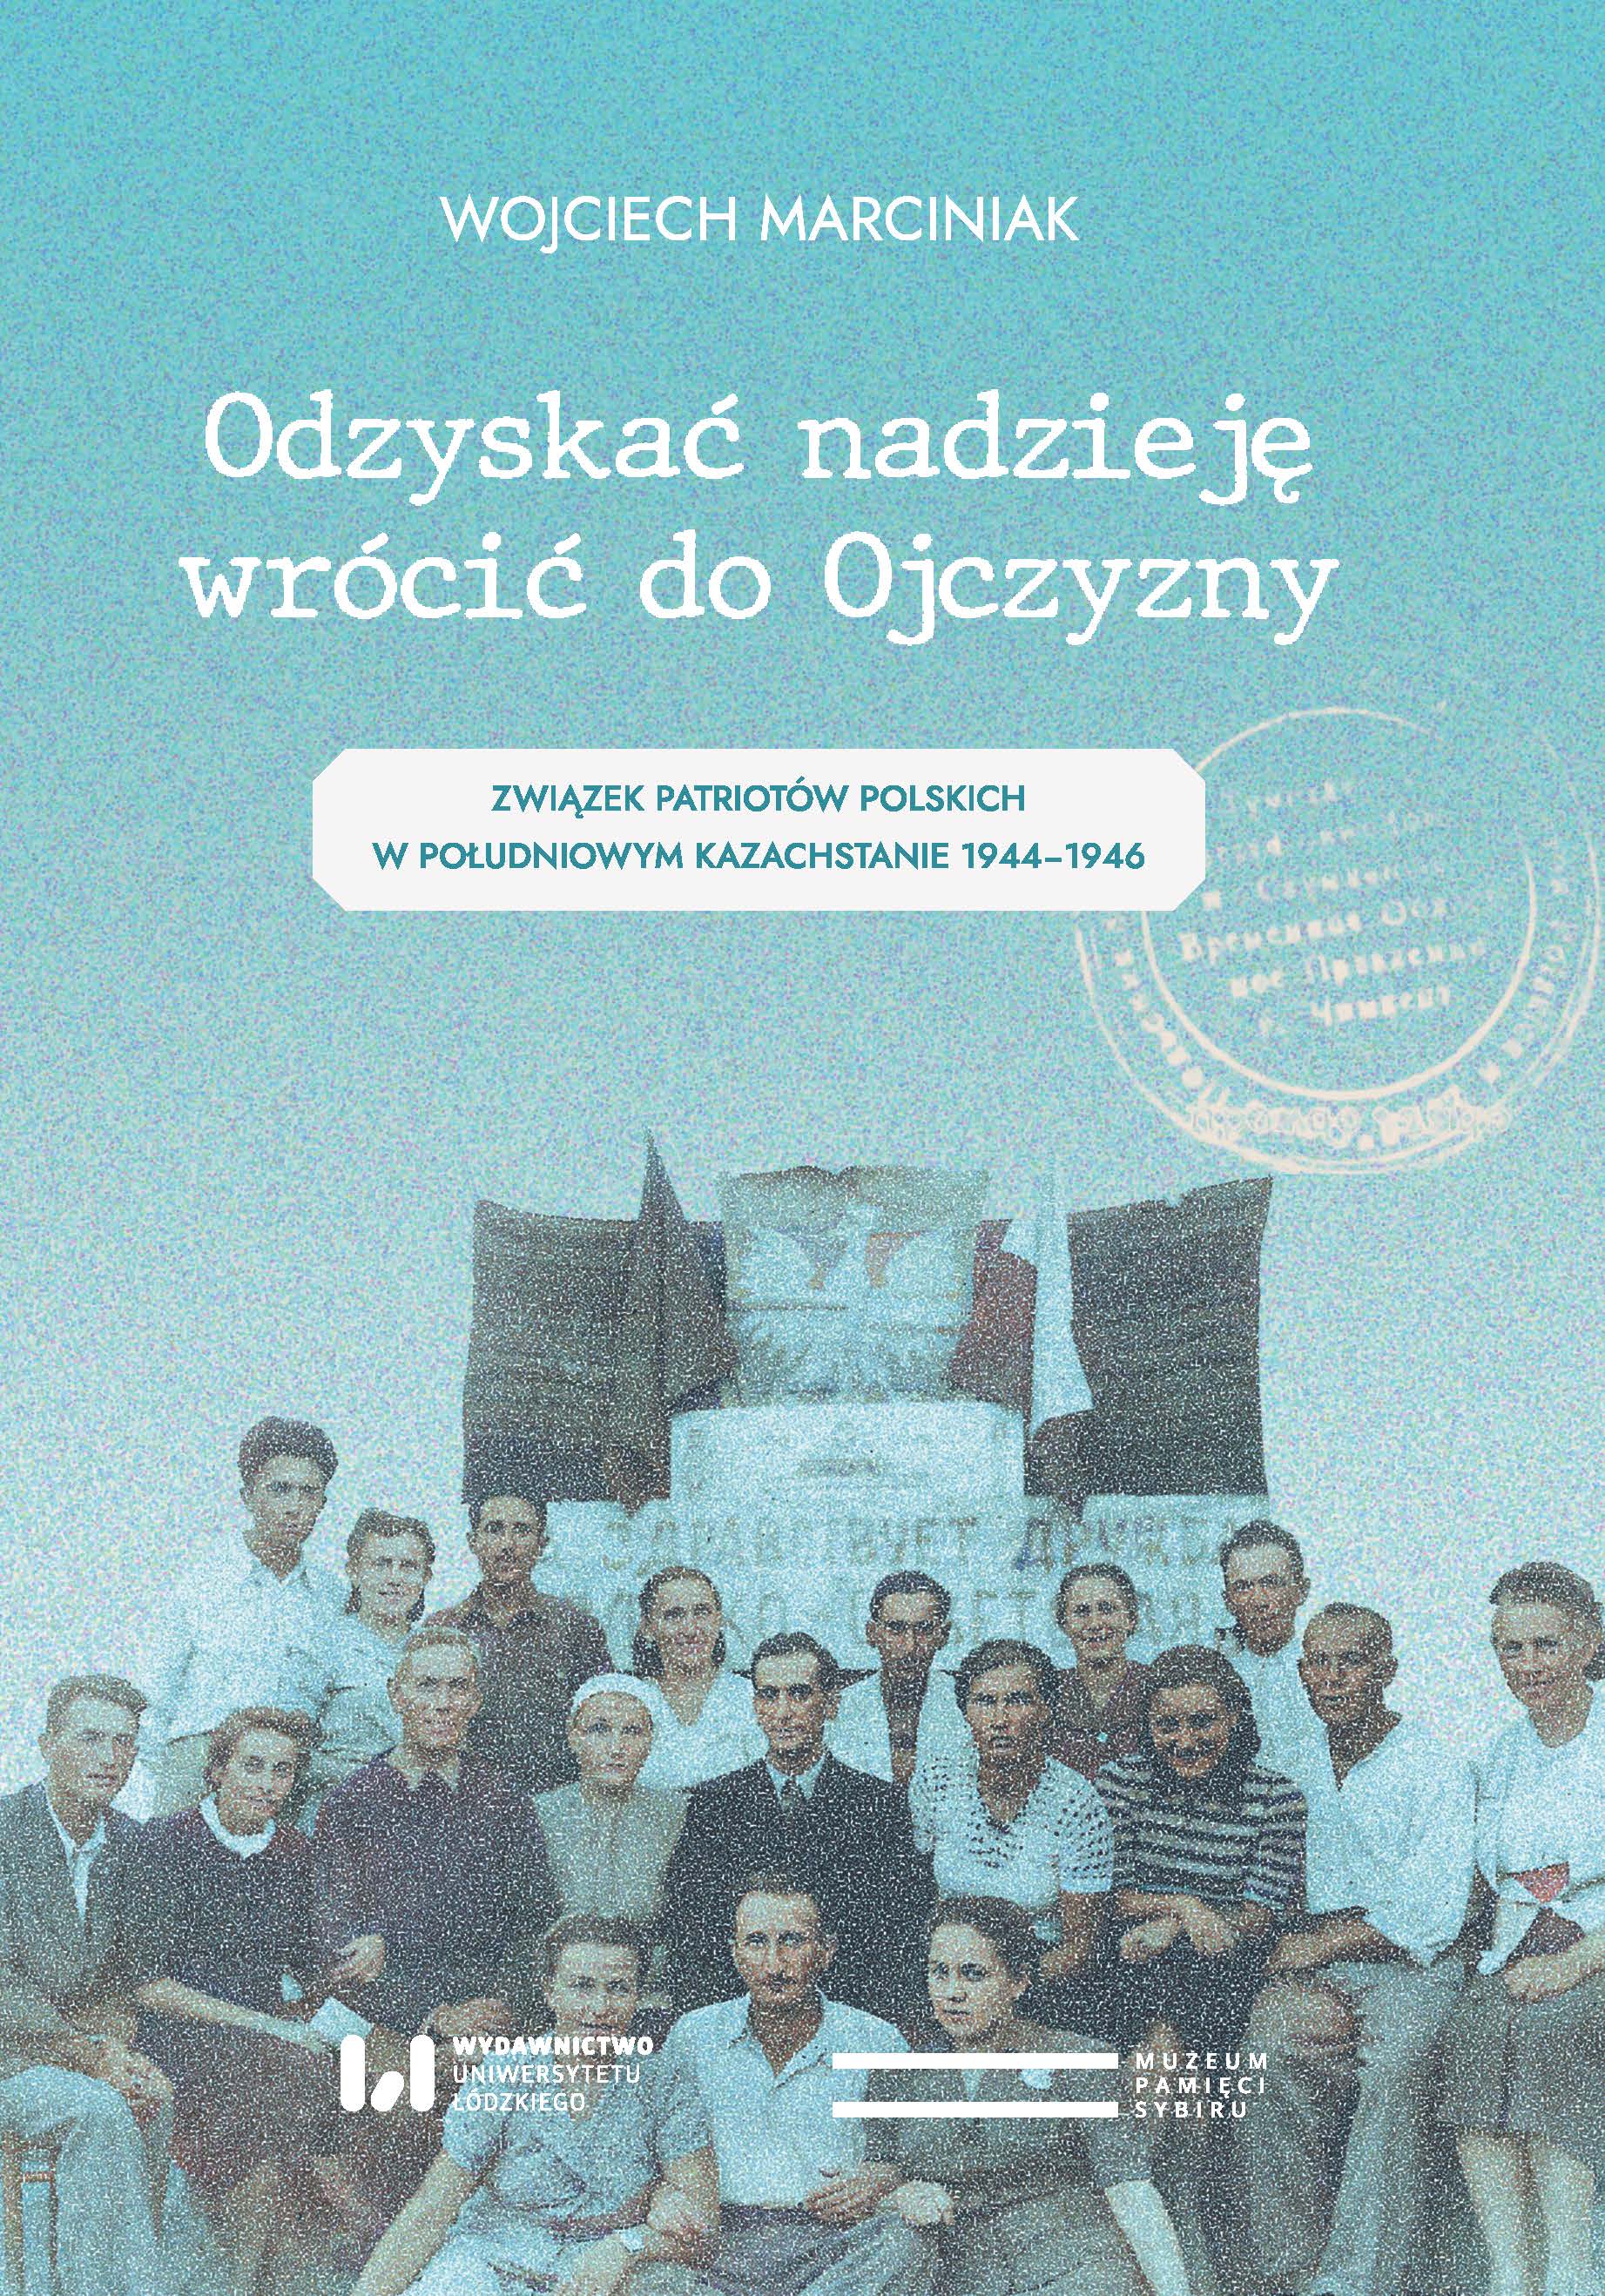 Regain hope, return to Homeland. Union of Polish Patriots in the South Kazakhstan 1944-1946 Cover Image